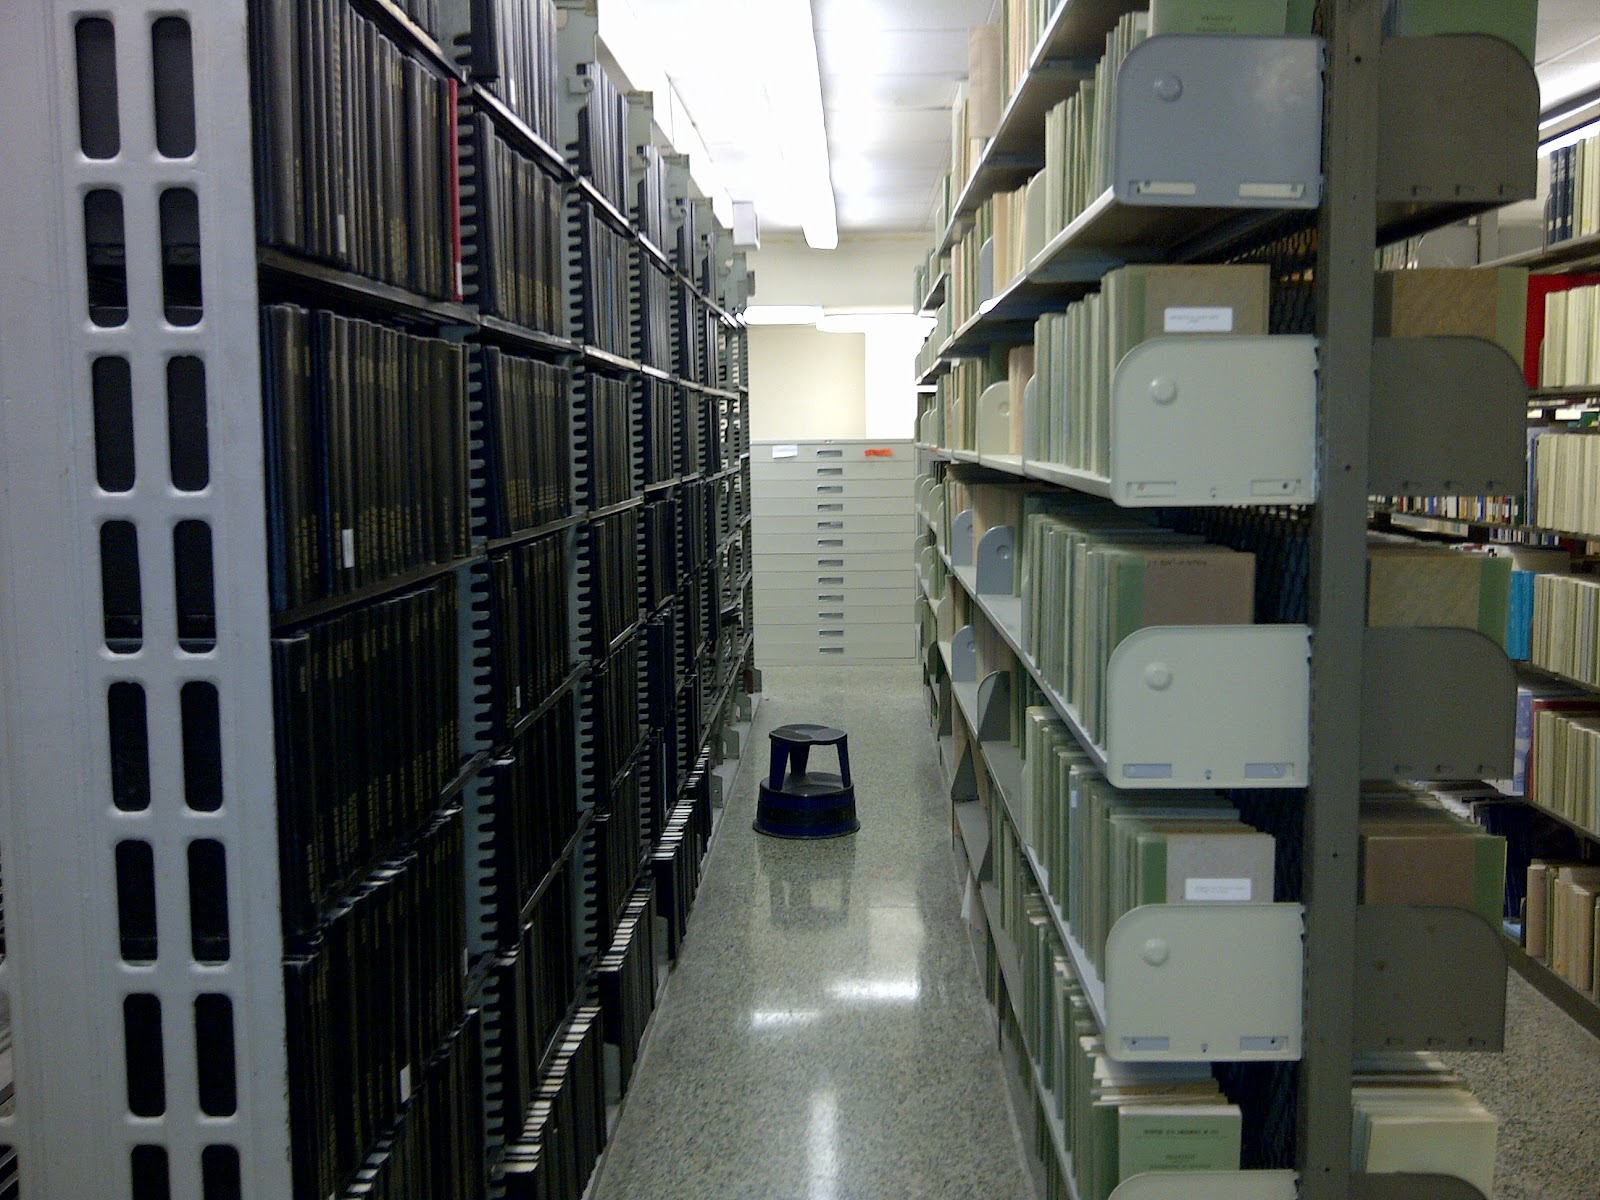 An aisle of a library bookshelves with books.